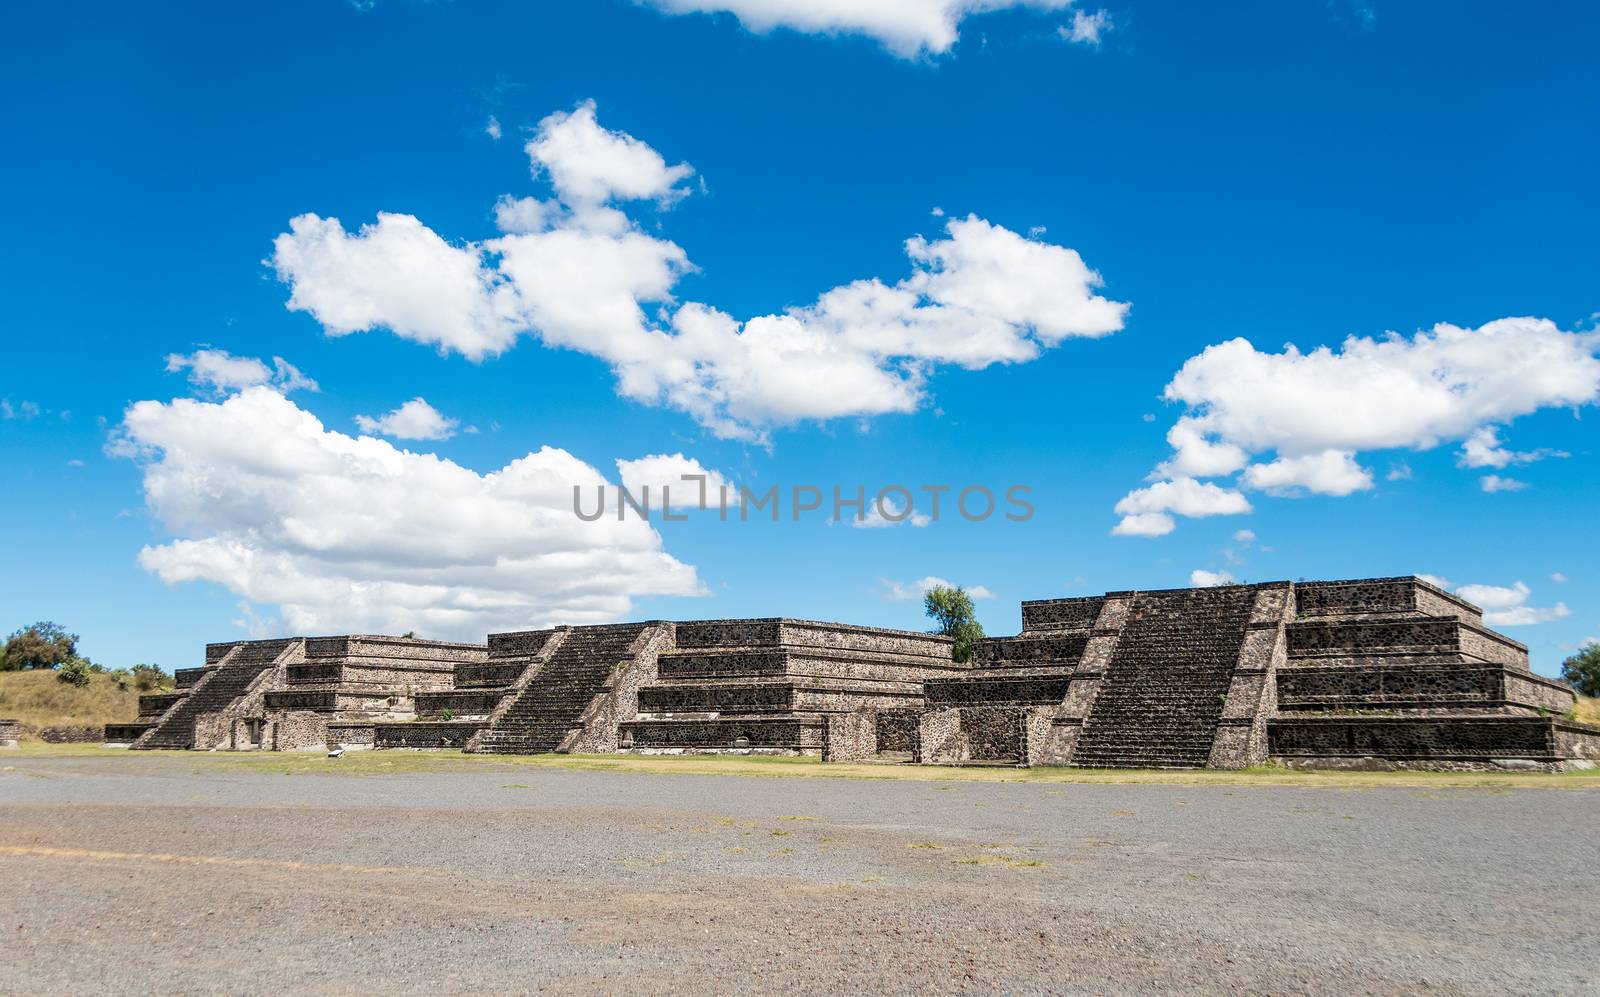 Three of the twelve small pyramids surrounding the Plaza of the Moon in front of the Pyramid of the Moon in San Juan Teotihuacan, Mexico. The structures are fron the period before 200 AD.